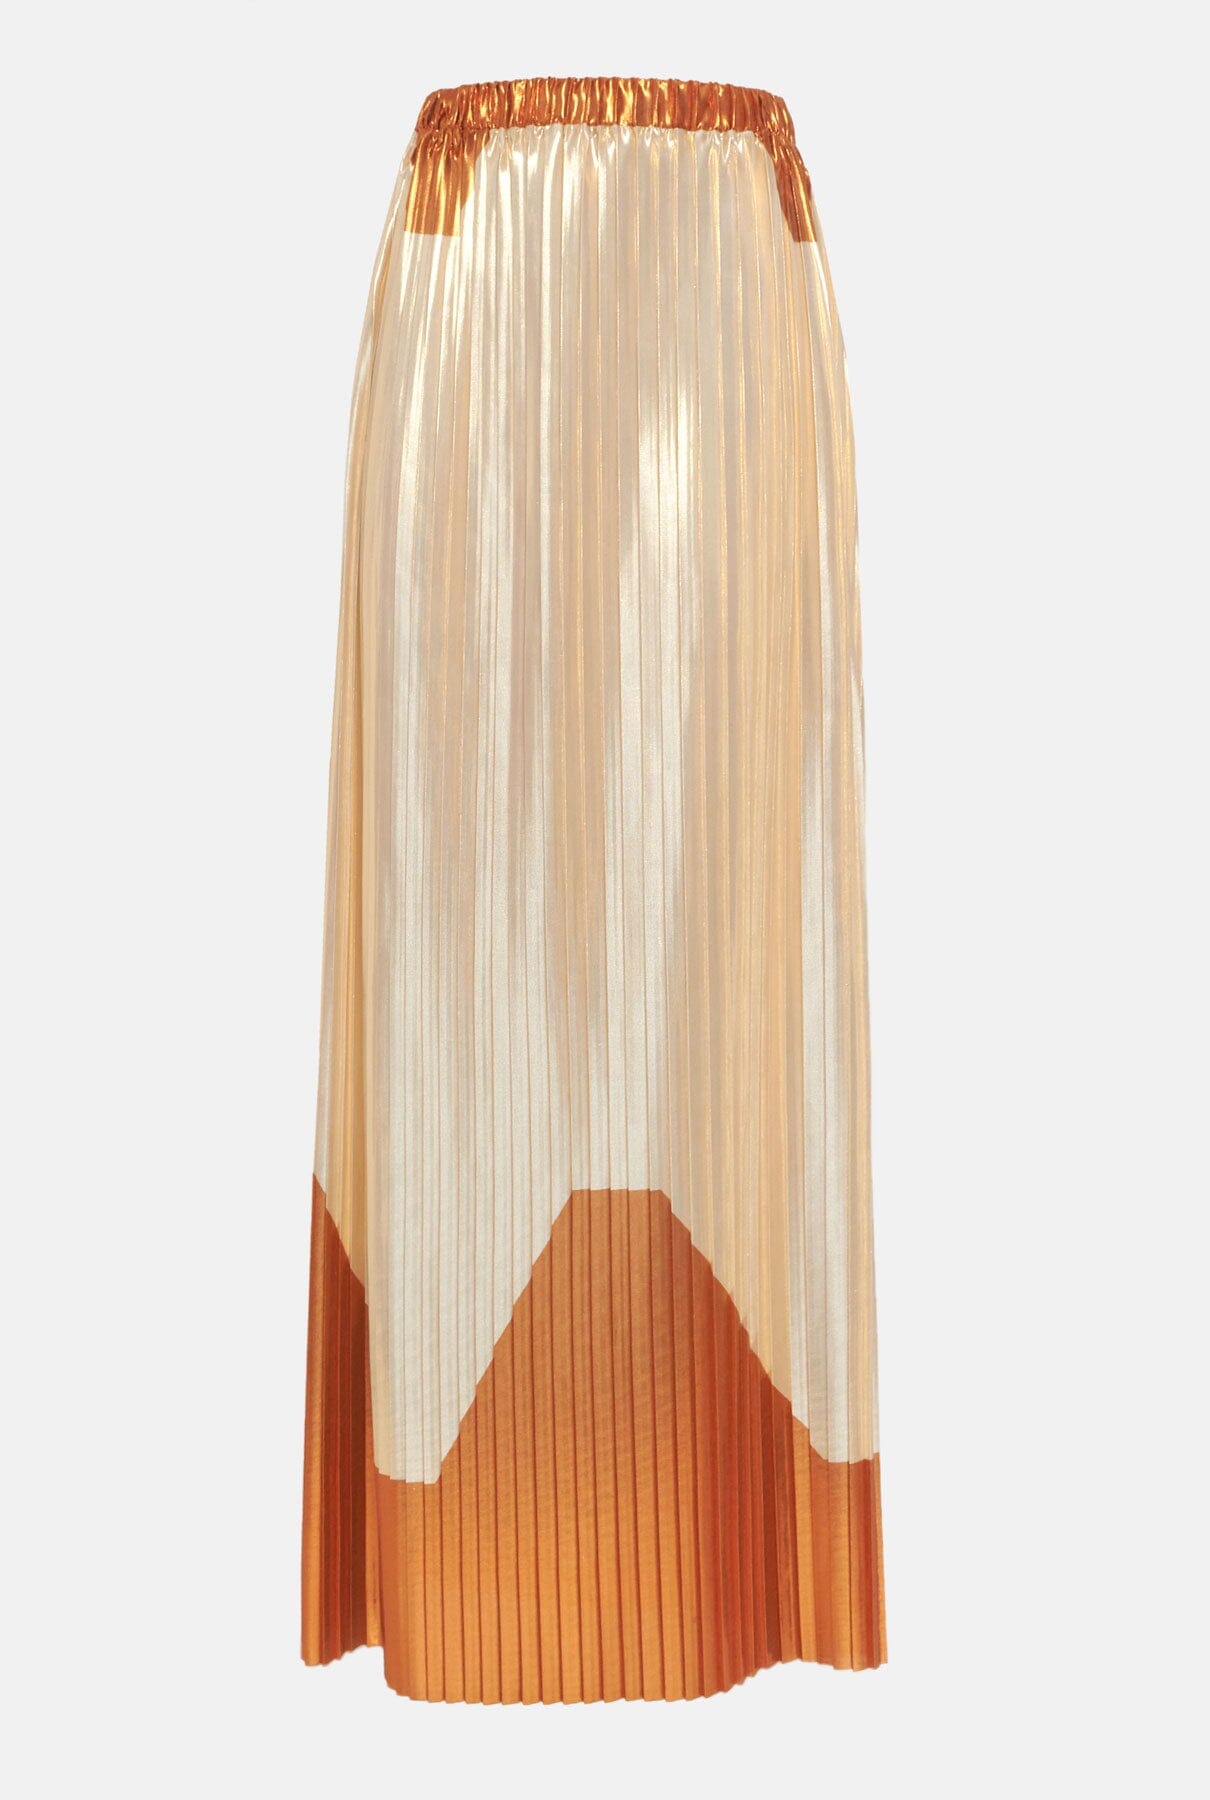 Pleated Fabric Skirt Skirts TETE BY ODETTE 